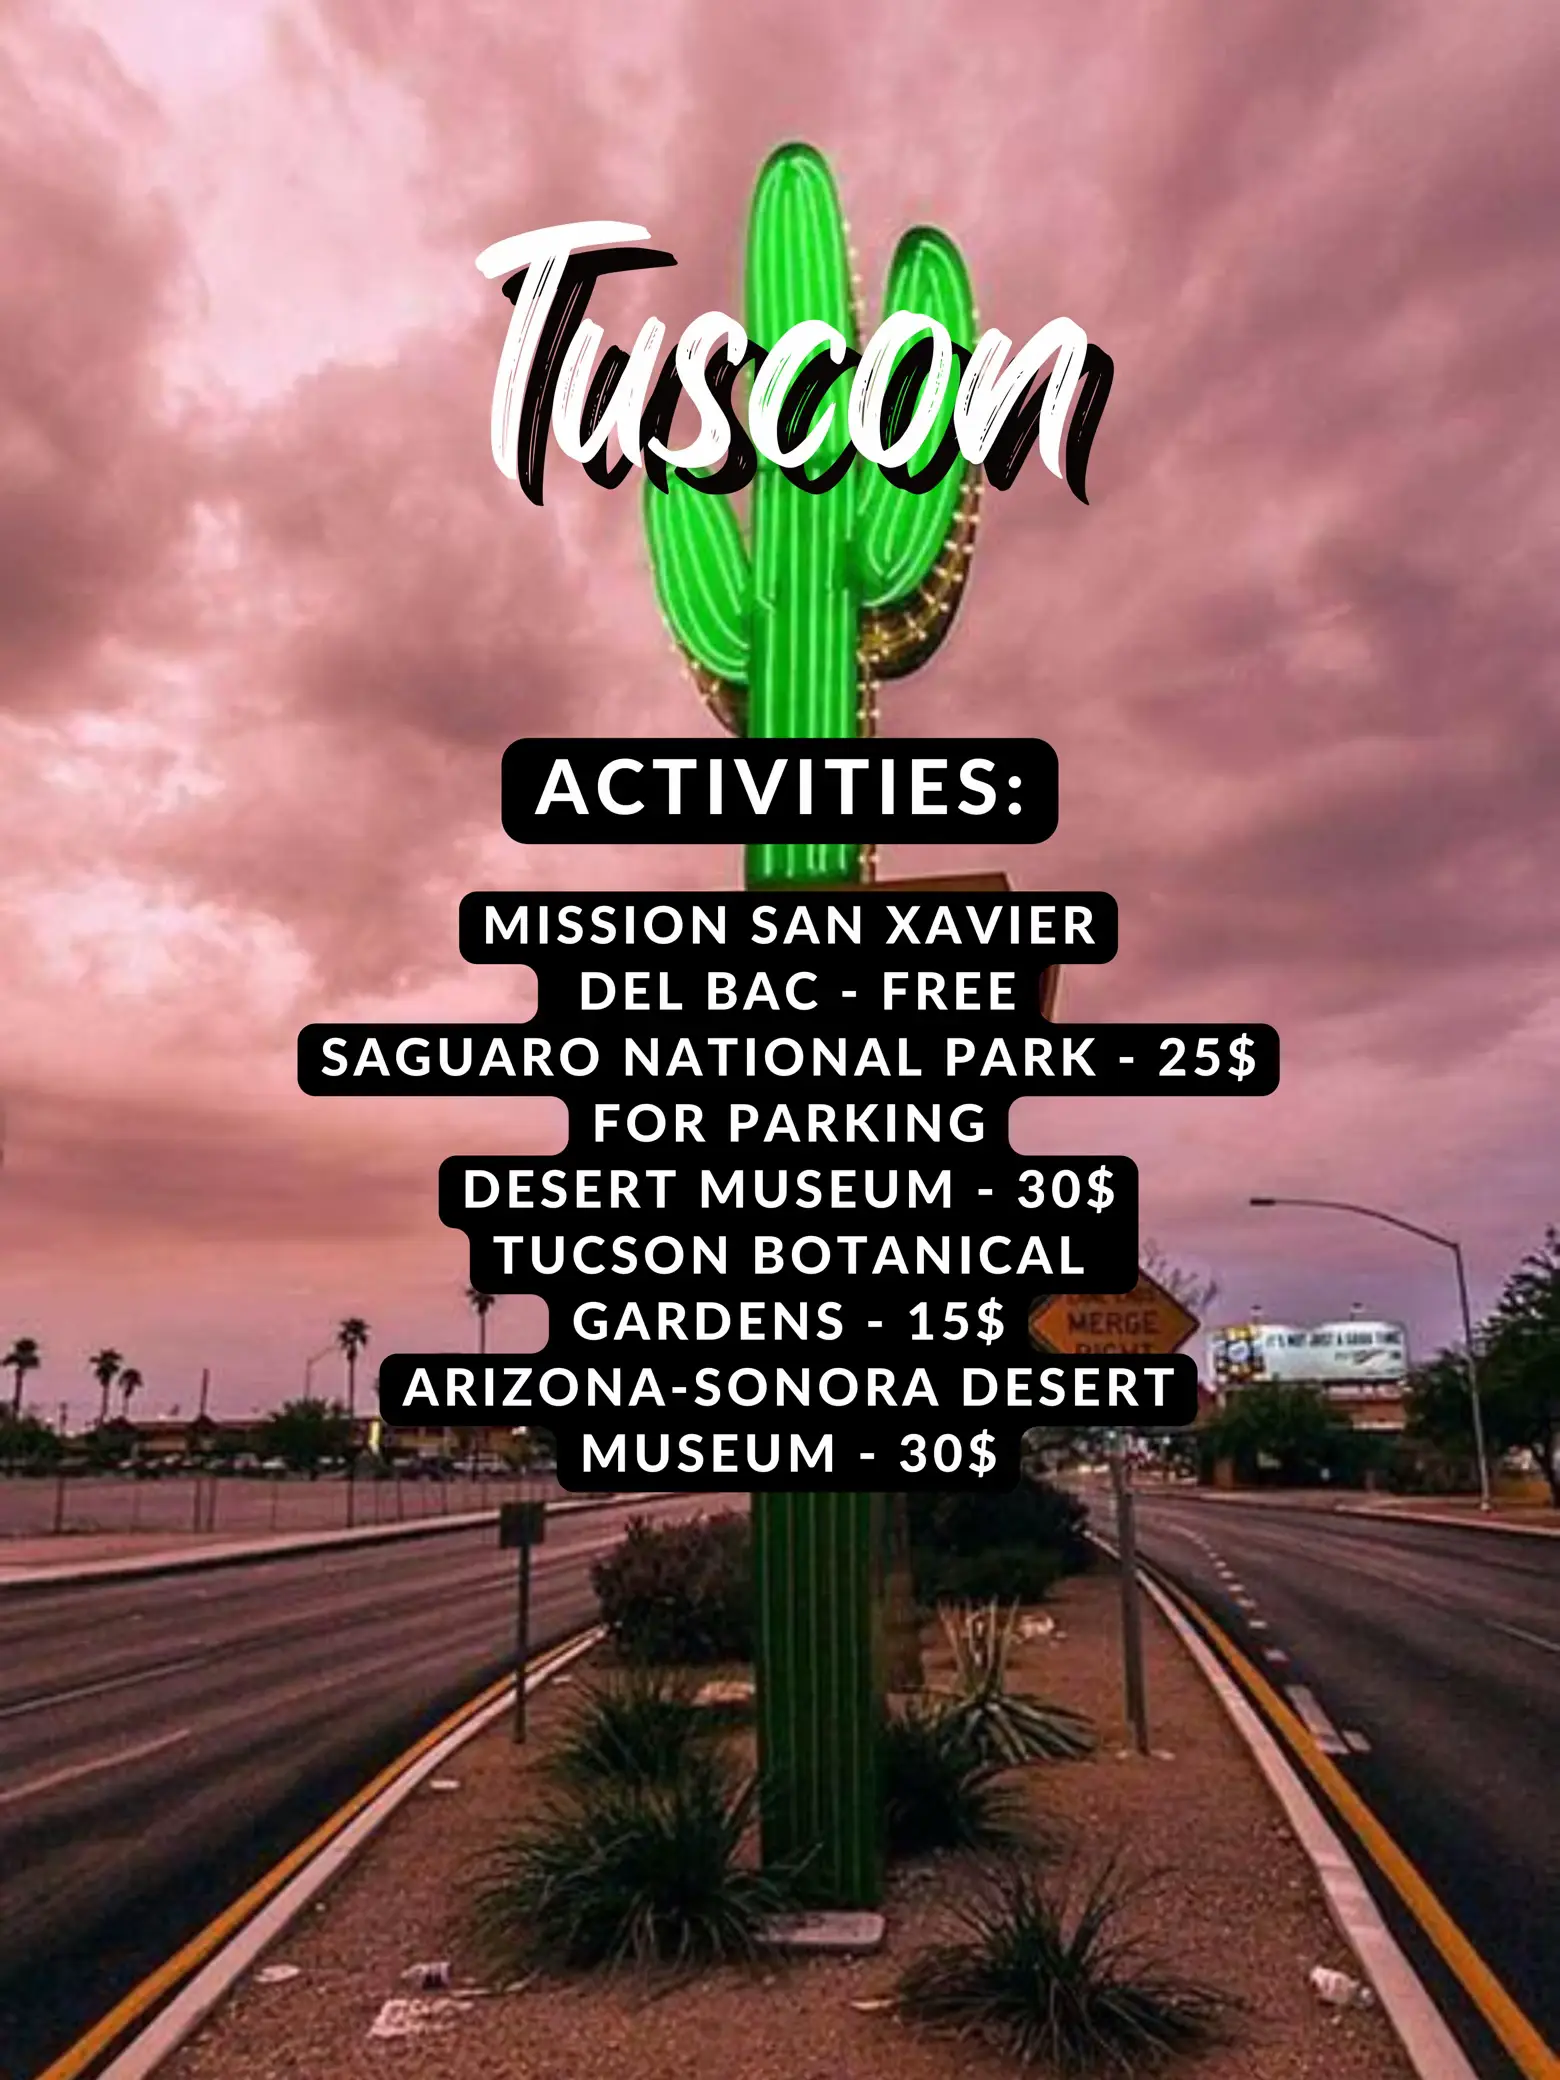  A picture of a cactus with the words "Tuscon"